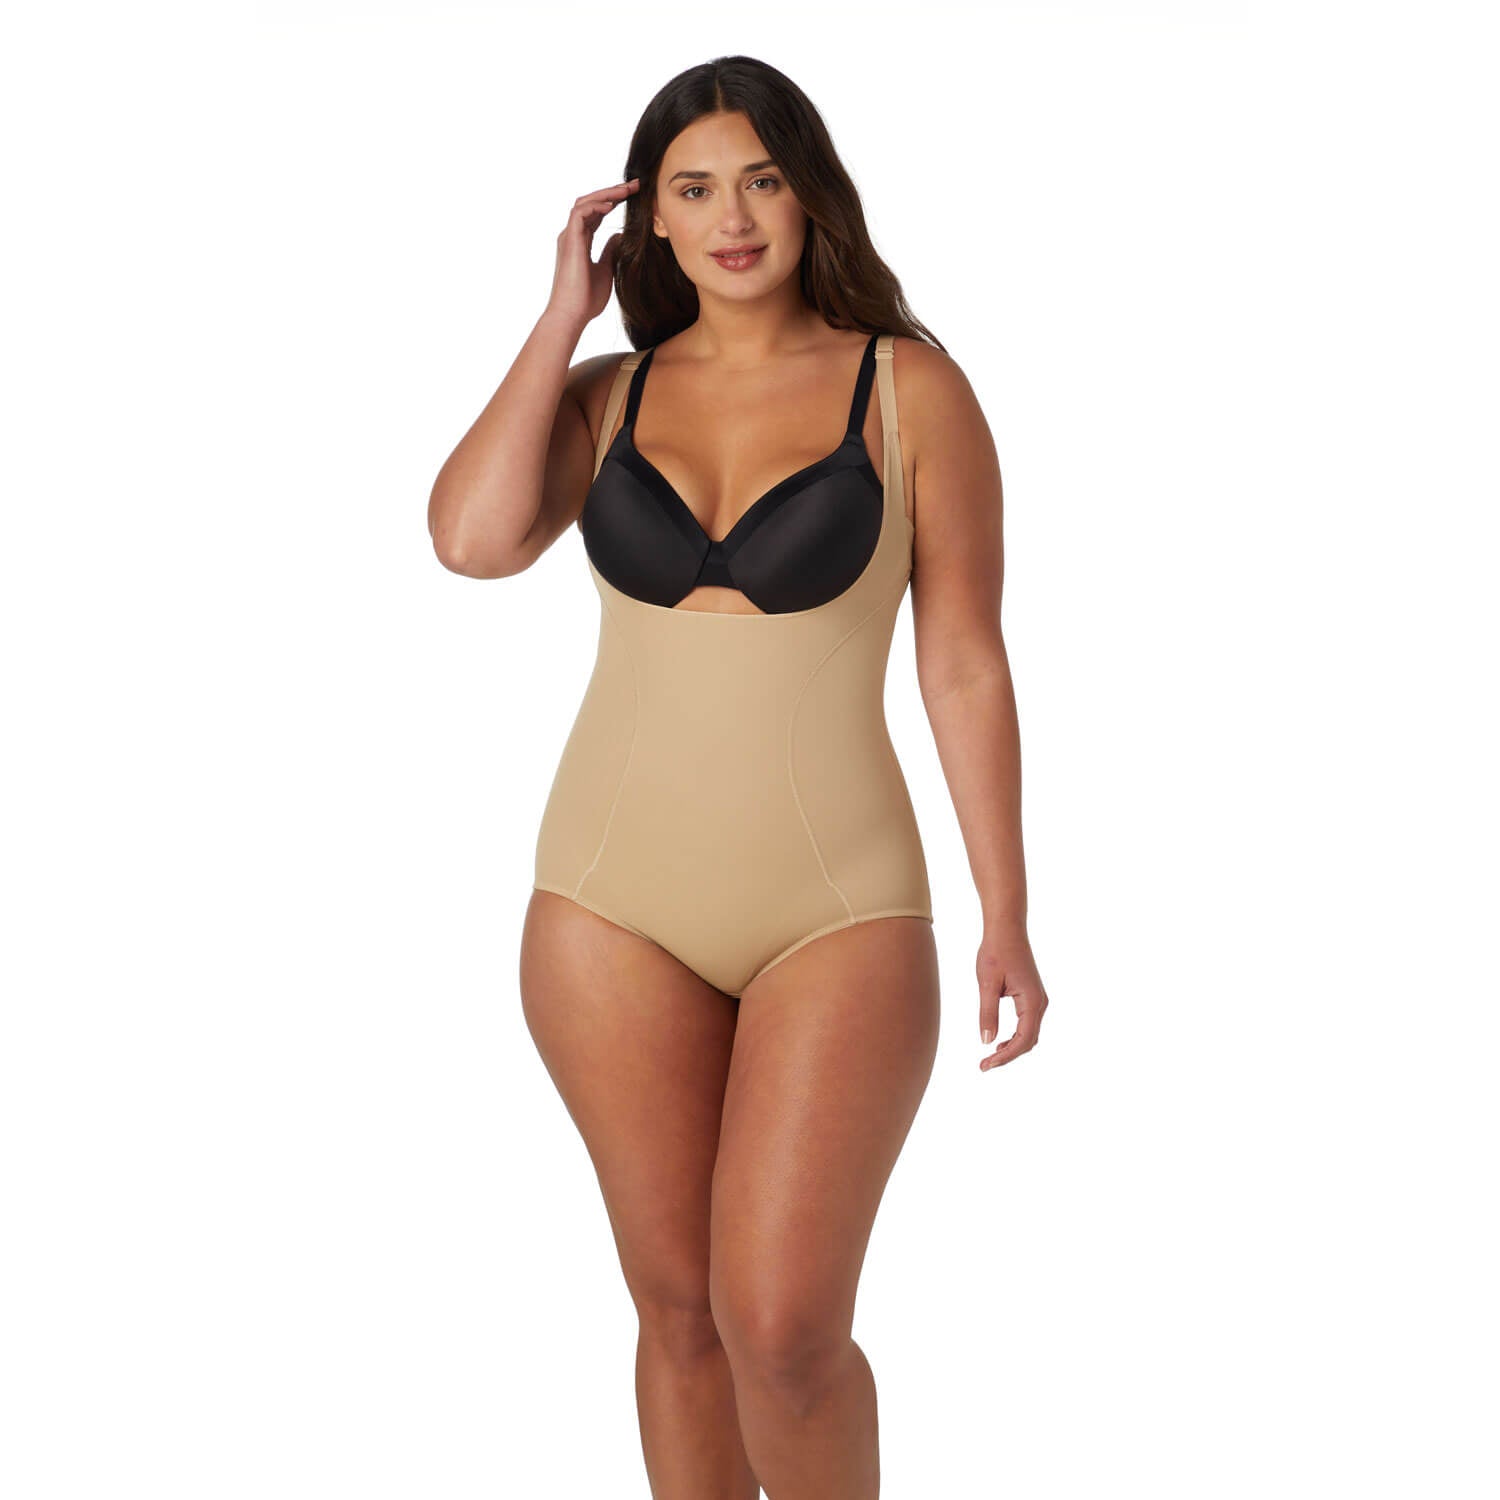 Ultimate Slimmer Bodybriefer – Shaws Department Stores